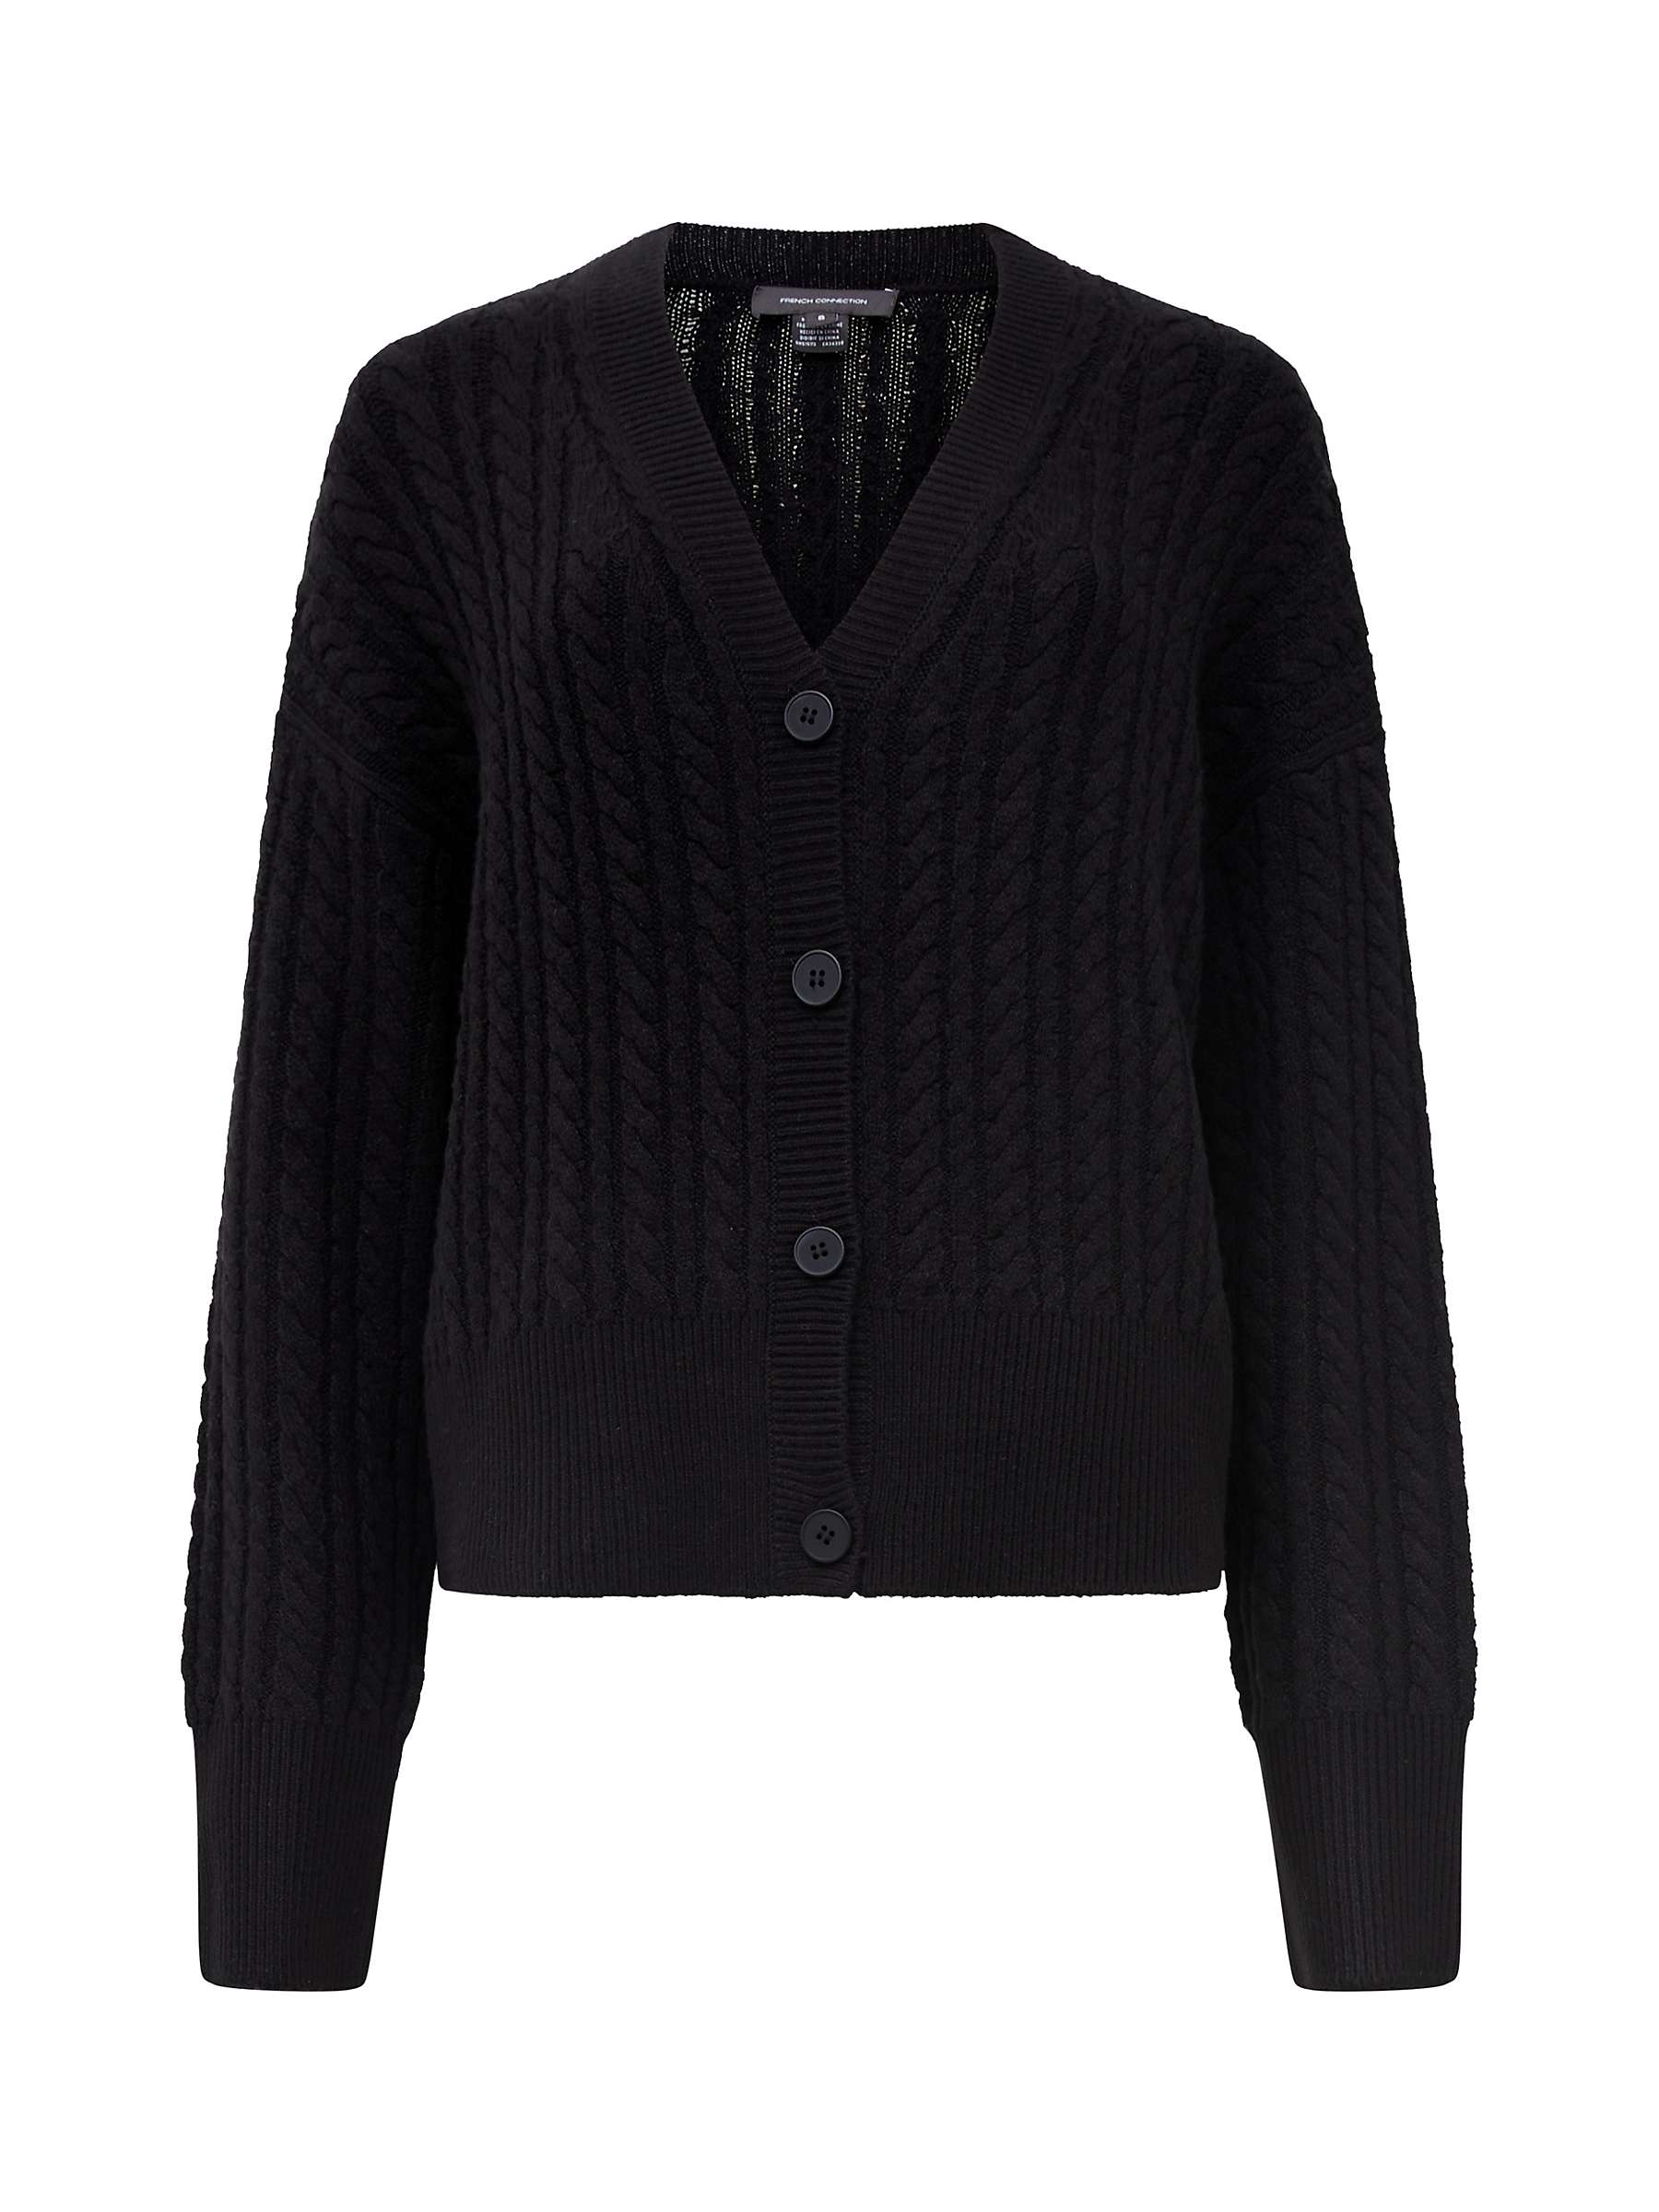 French Connection Babysoft Cable Knit Cardigan, Black at John Lewis ...